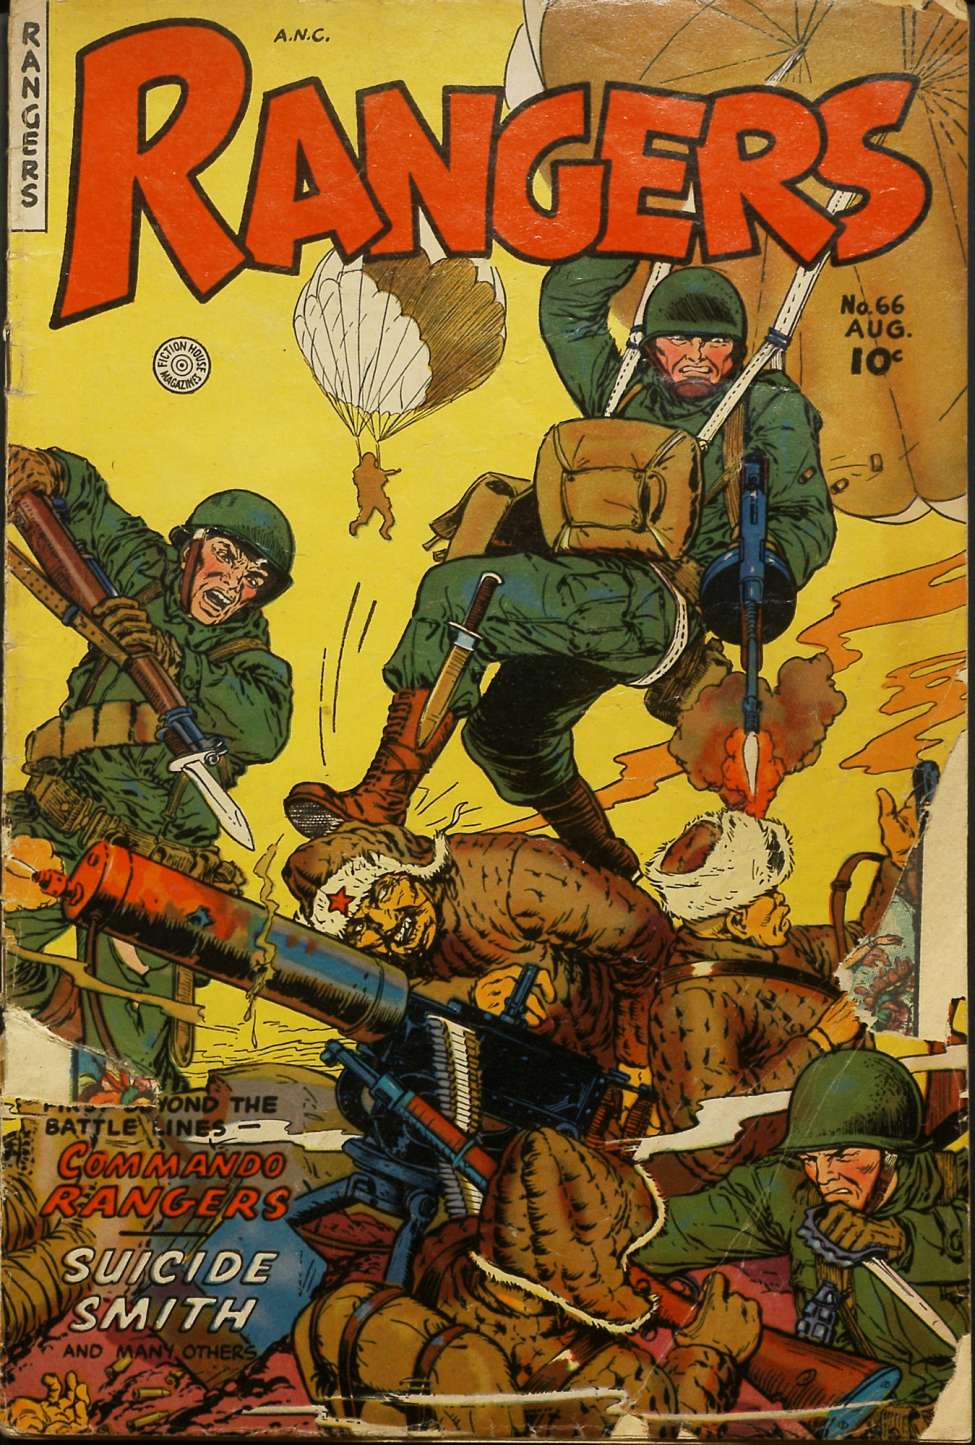 Book Cover For Rangers Comics 66 - Version 1